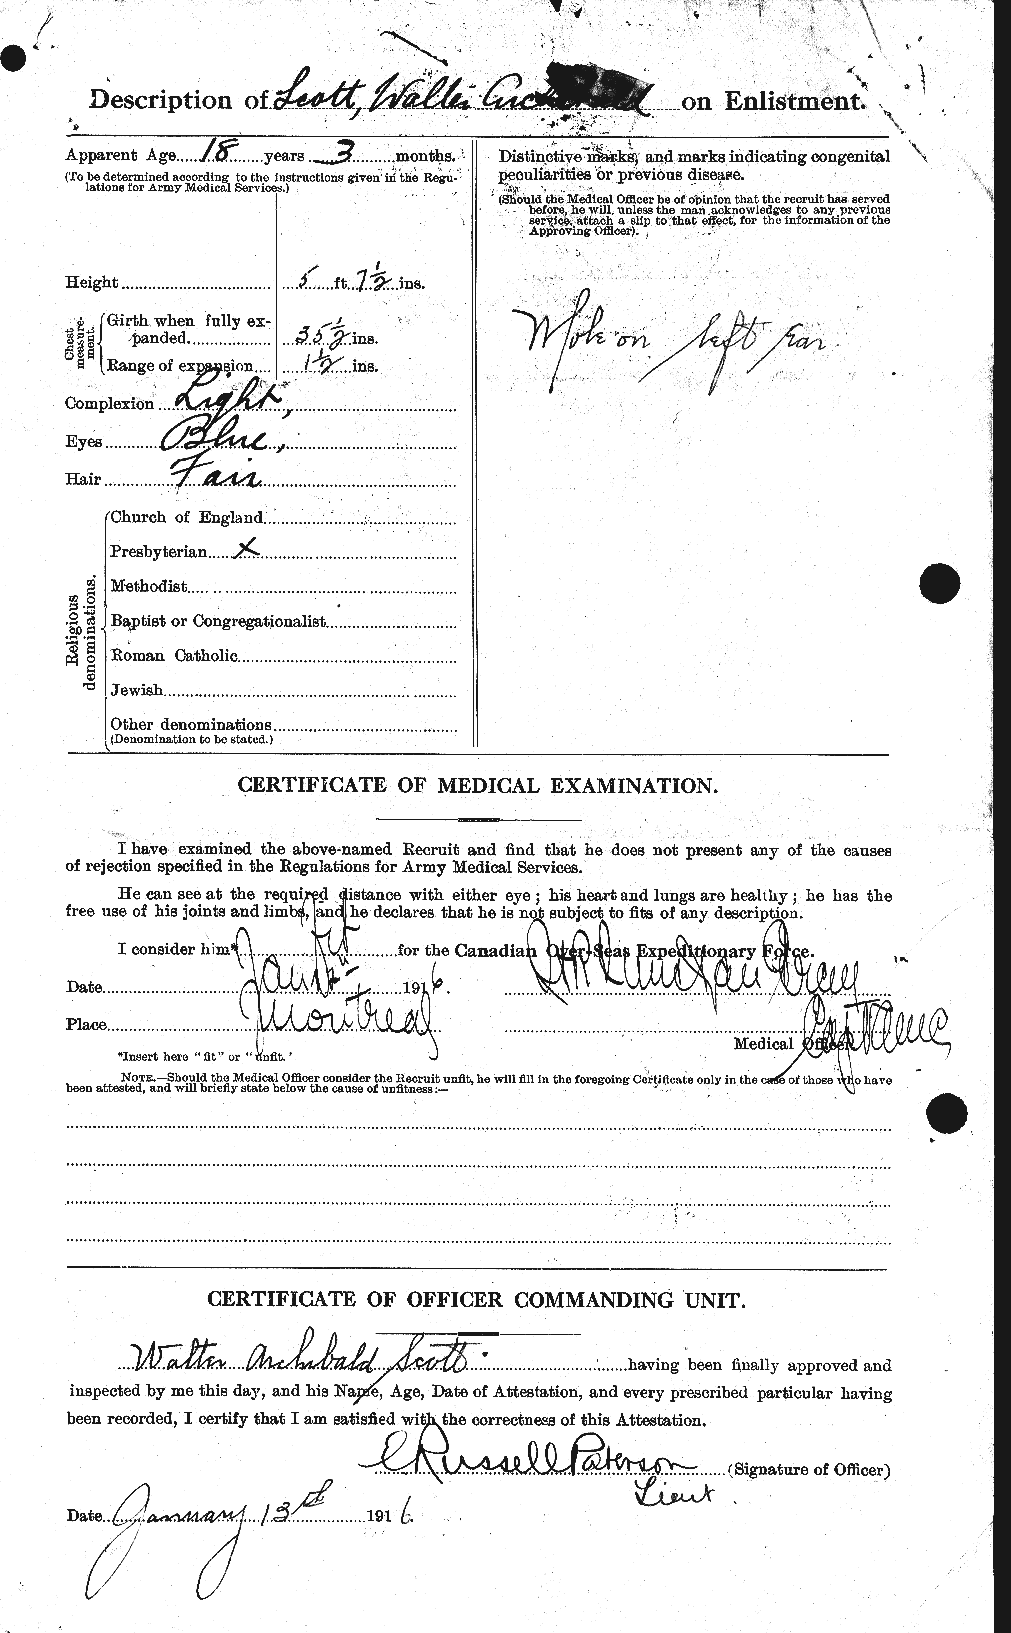 Personnel Records of the First World War - CEF 088002b